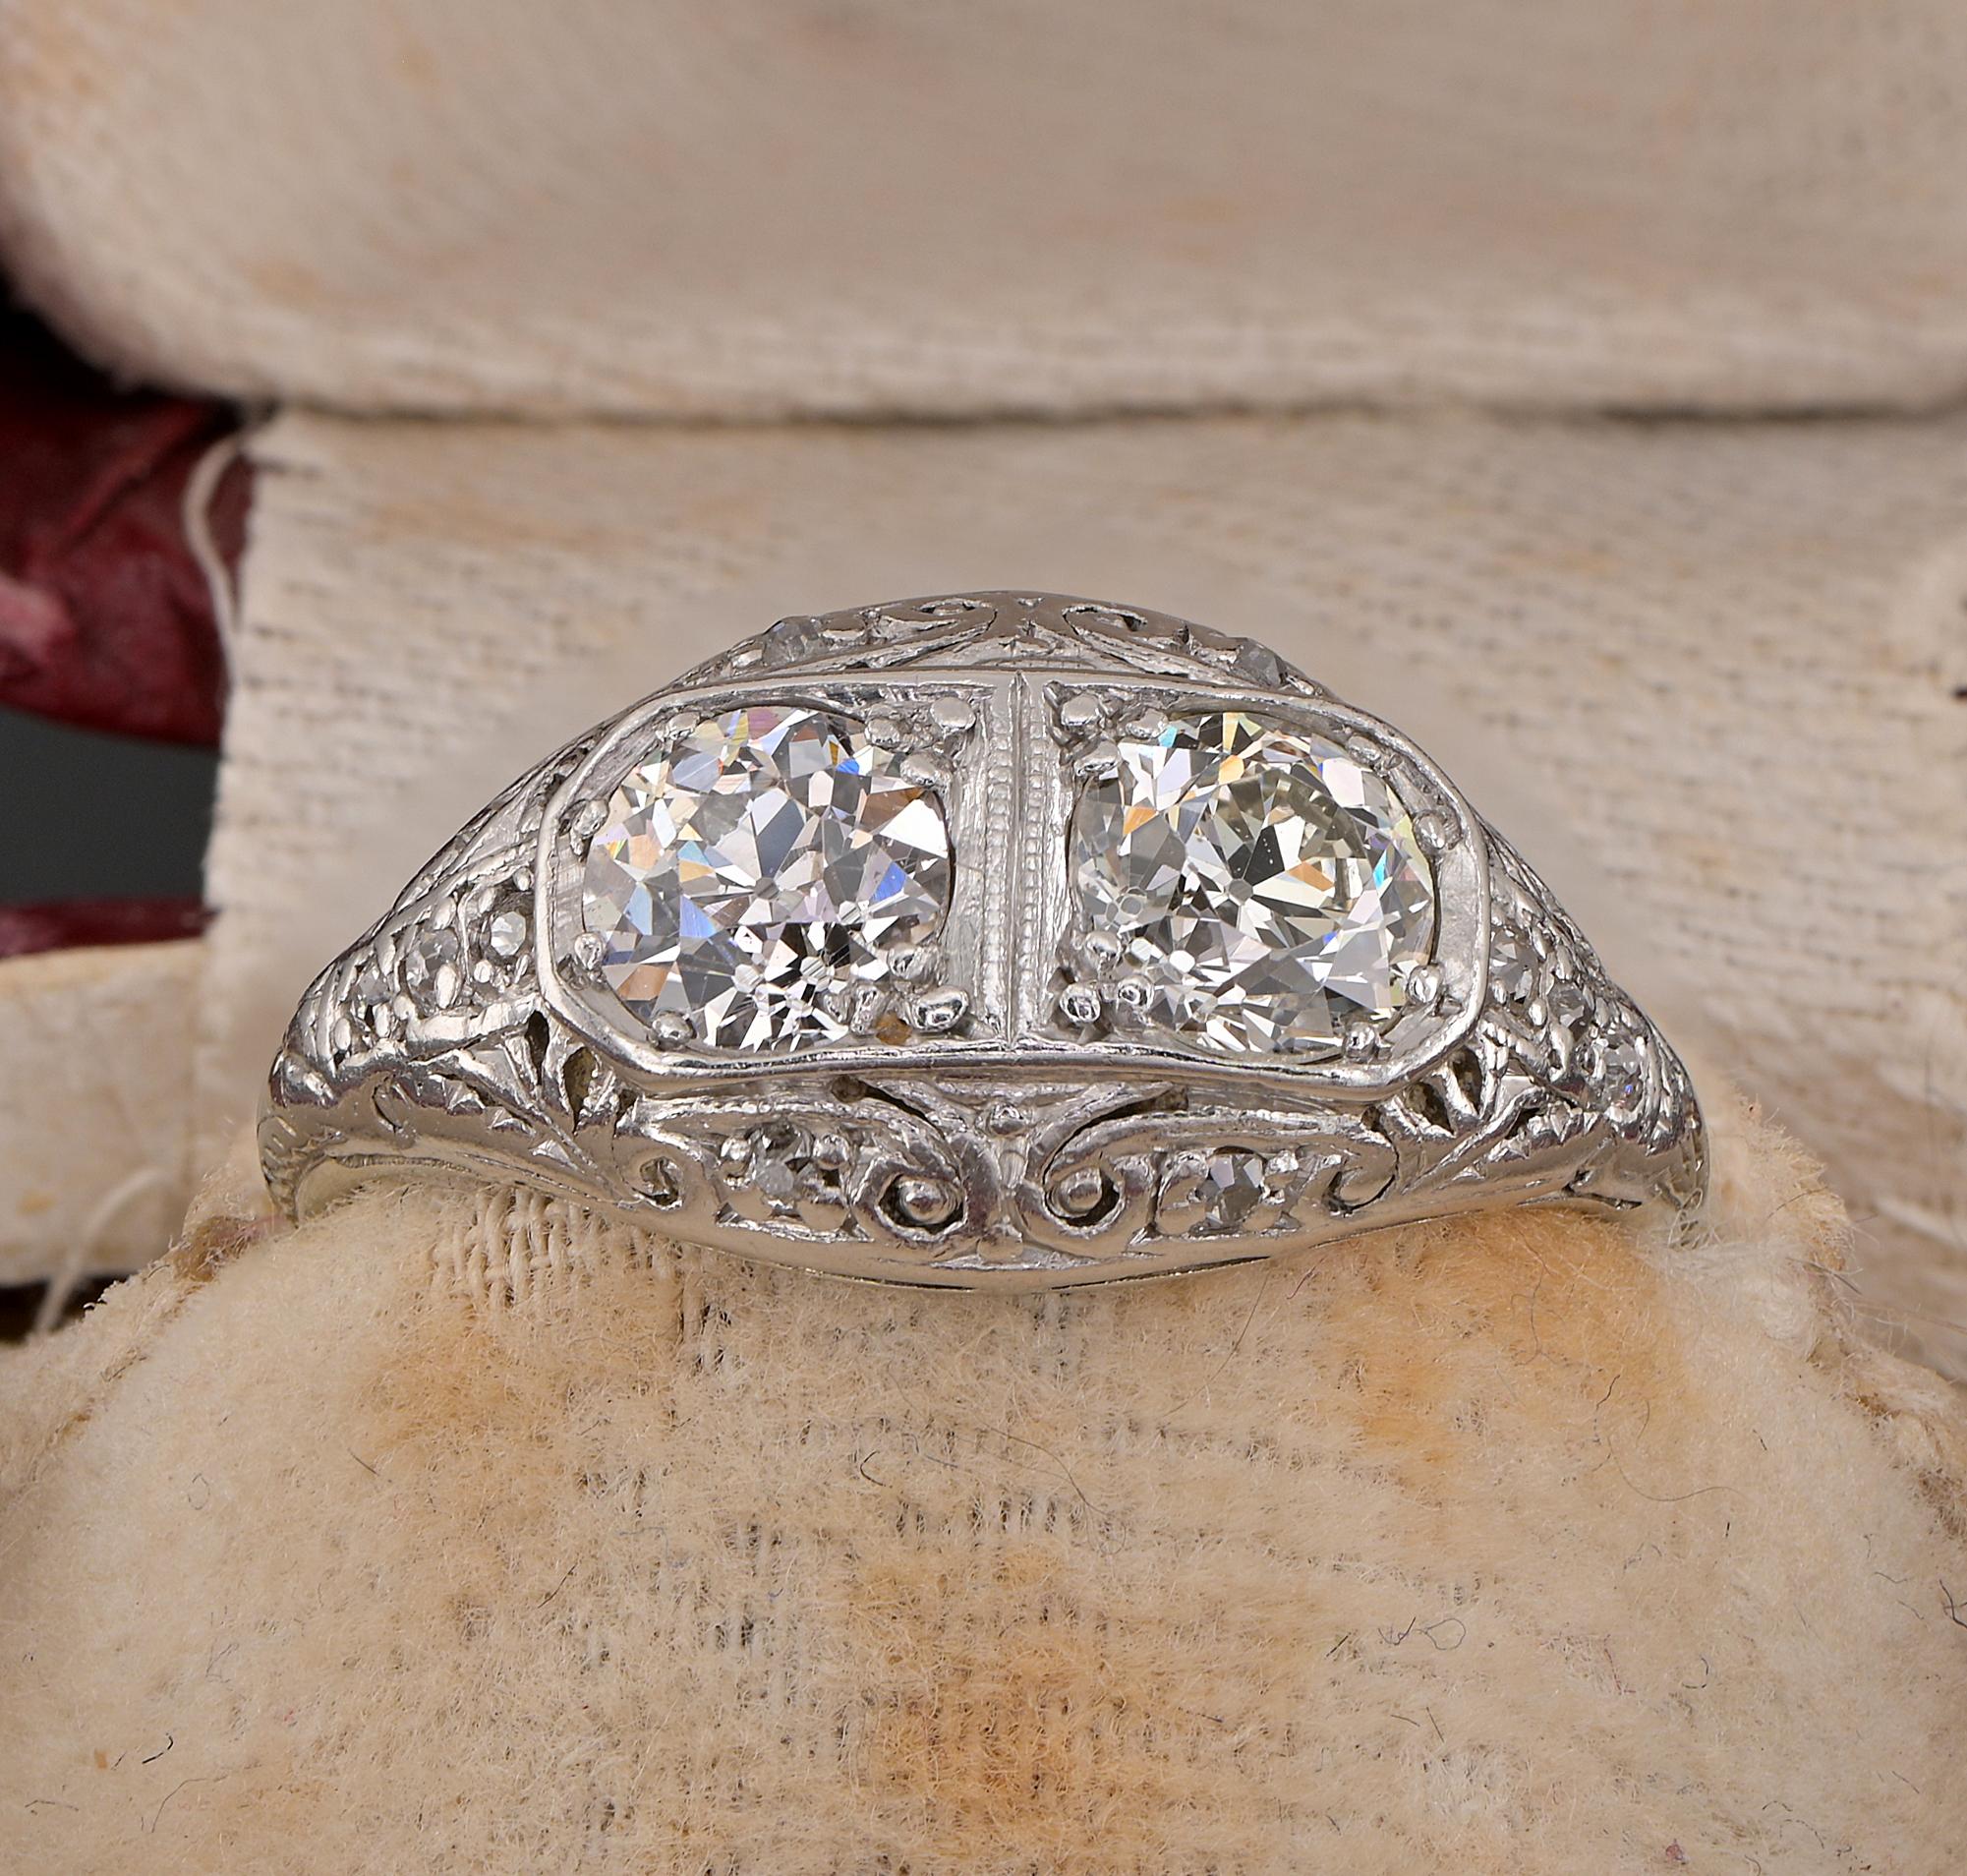 This absolutely gorgeous double Diamond ring is Art Deco period, 1925 ca
Superb filigree work as favorite expression of the Deco period entirely hand made of solid 18 KT gold
The fantastic past artwork is topped by two high quality old cut European